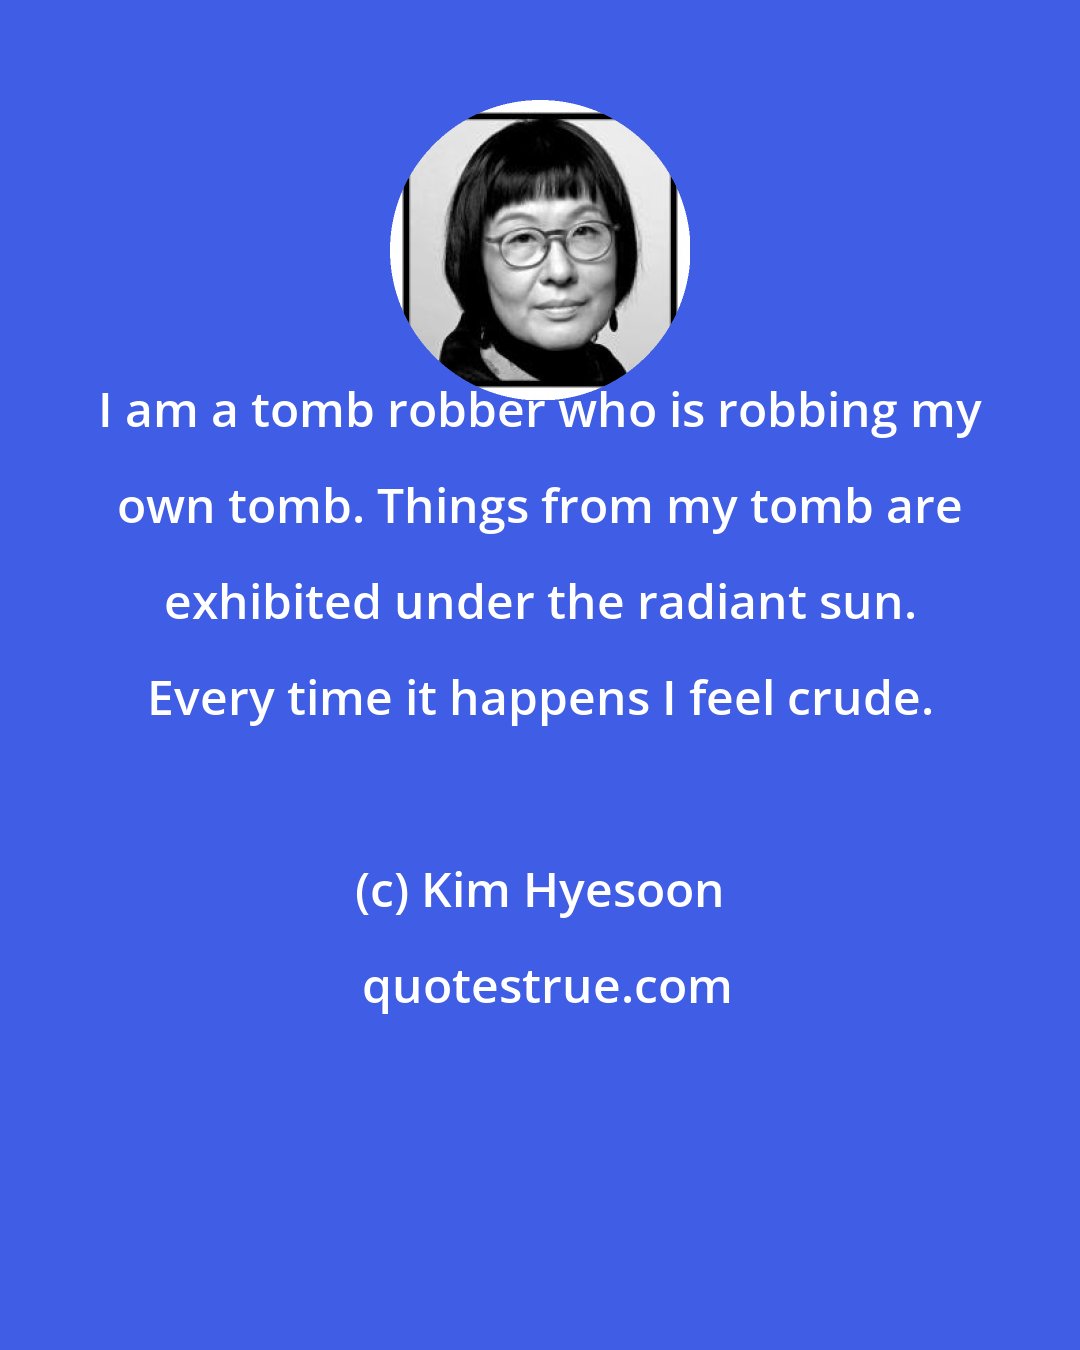 Kim Hyesoon: I am a tomb robber who is robbing my own tomb. Things from my tomb are exhibited under the radiant sun. Every time it happens I feel crude.